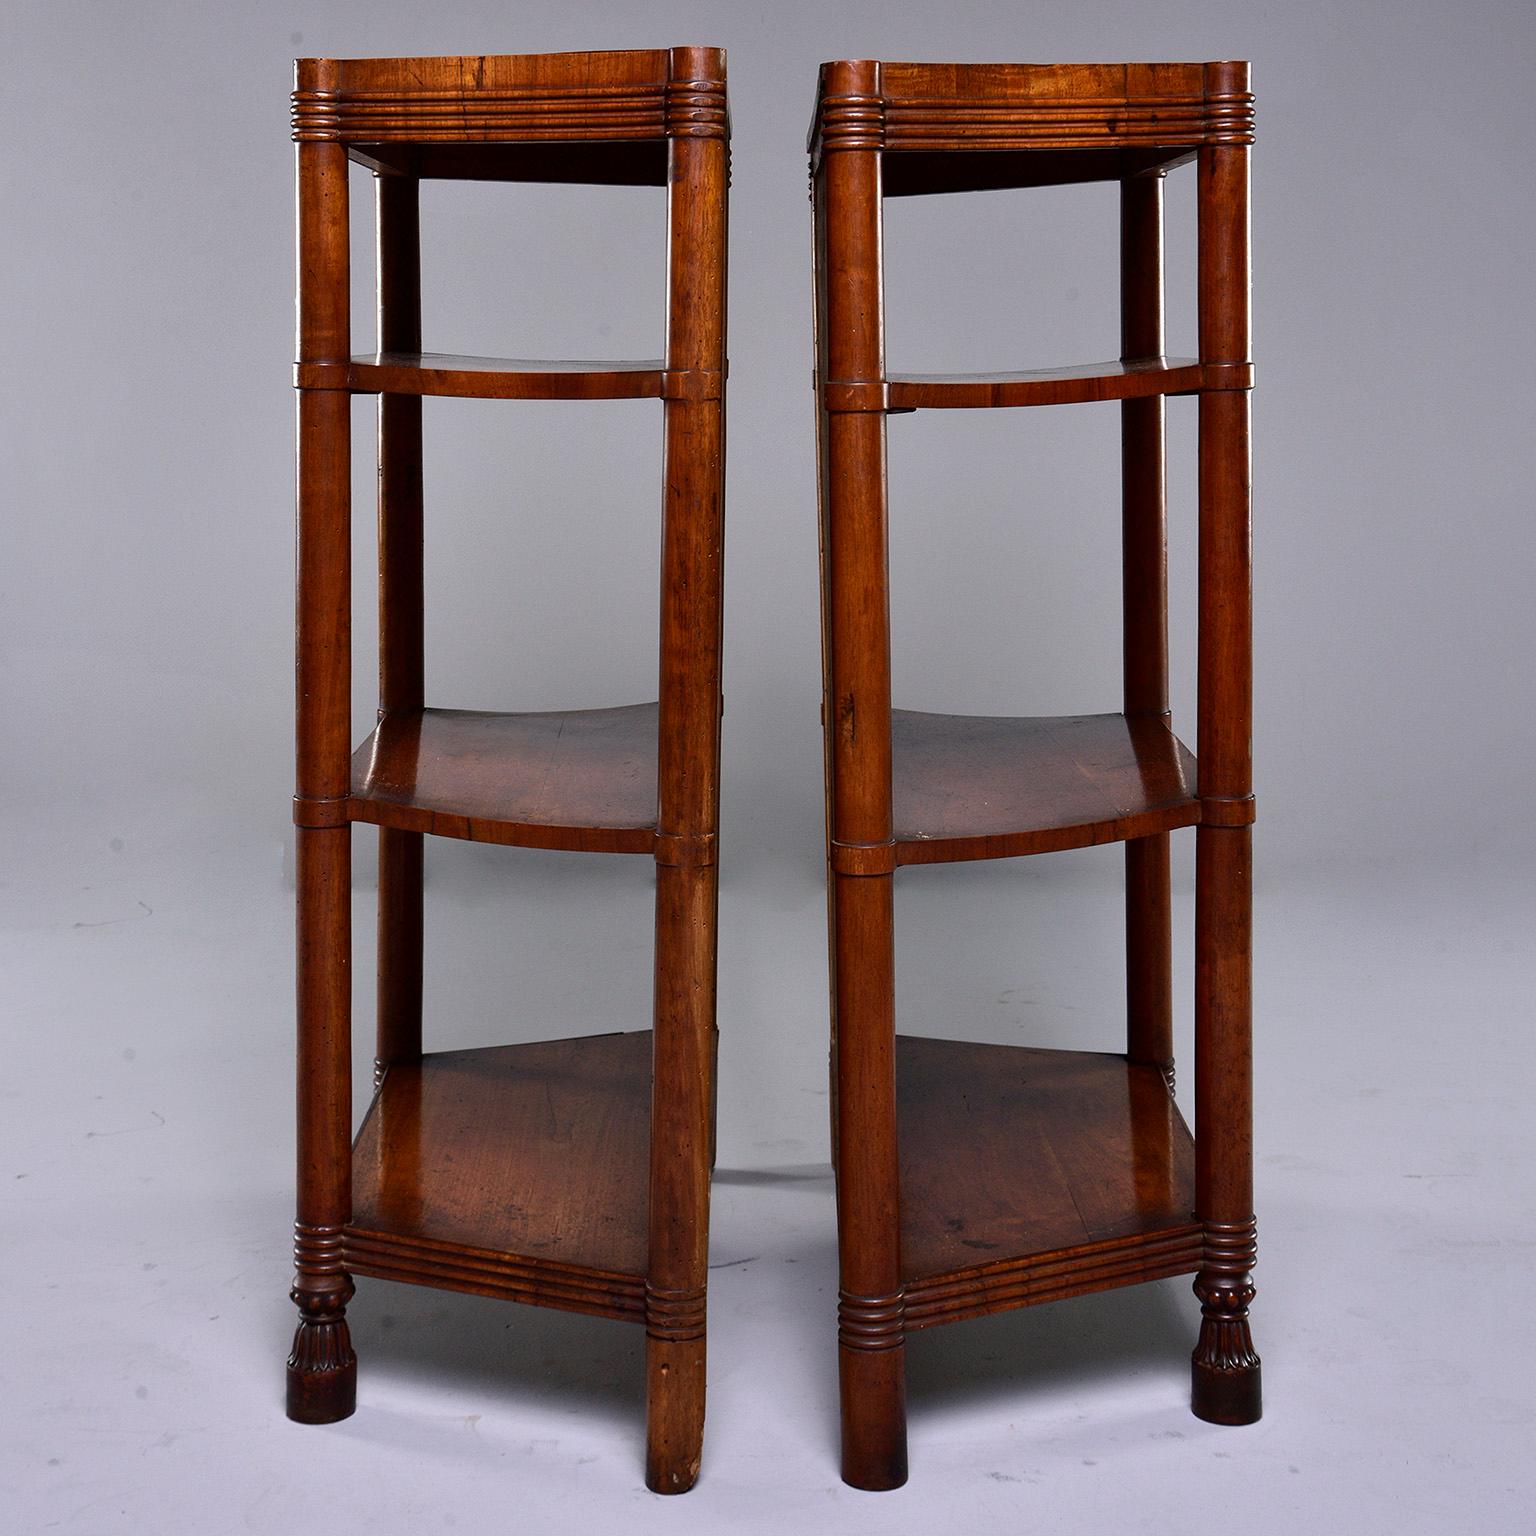 Pair of Italian freestanding shelf units made of wood with walnut veneer, circa 1920s. Shelves feature solid backs, decorative ridging on top and base, footed front legs and three shelves each with angled sides. Unknown maker. Sold and priced as a